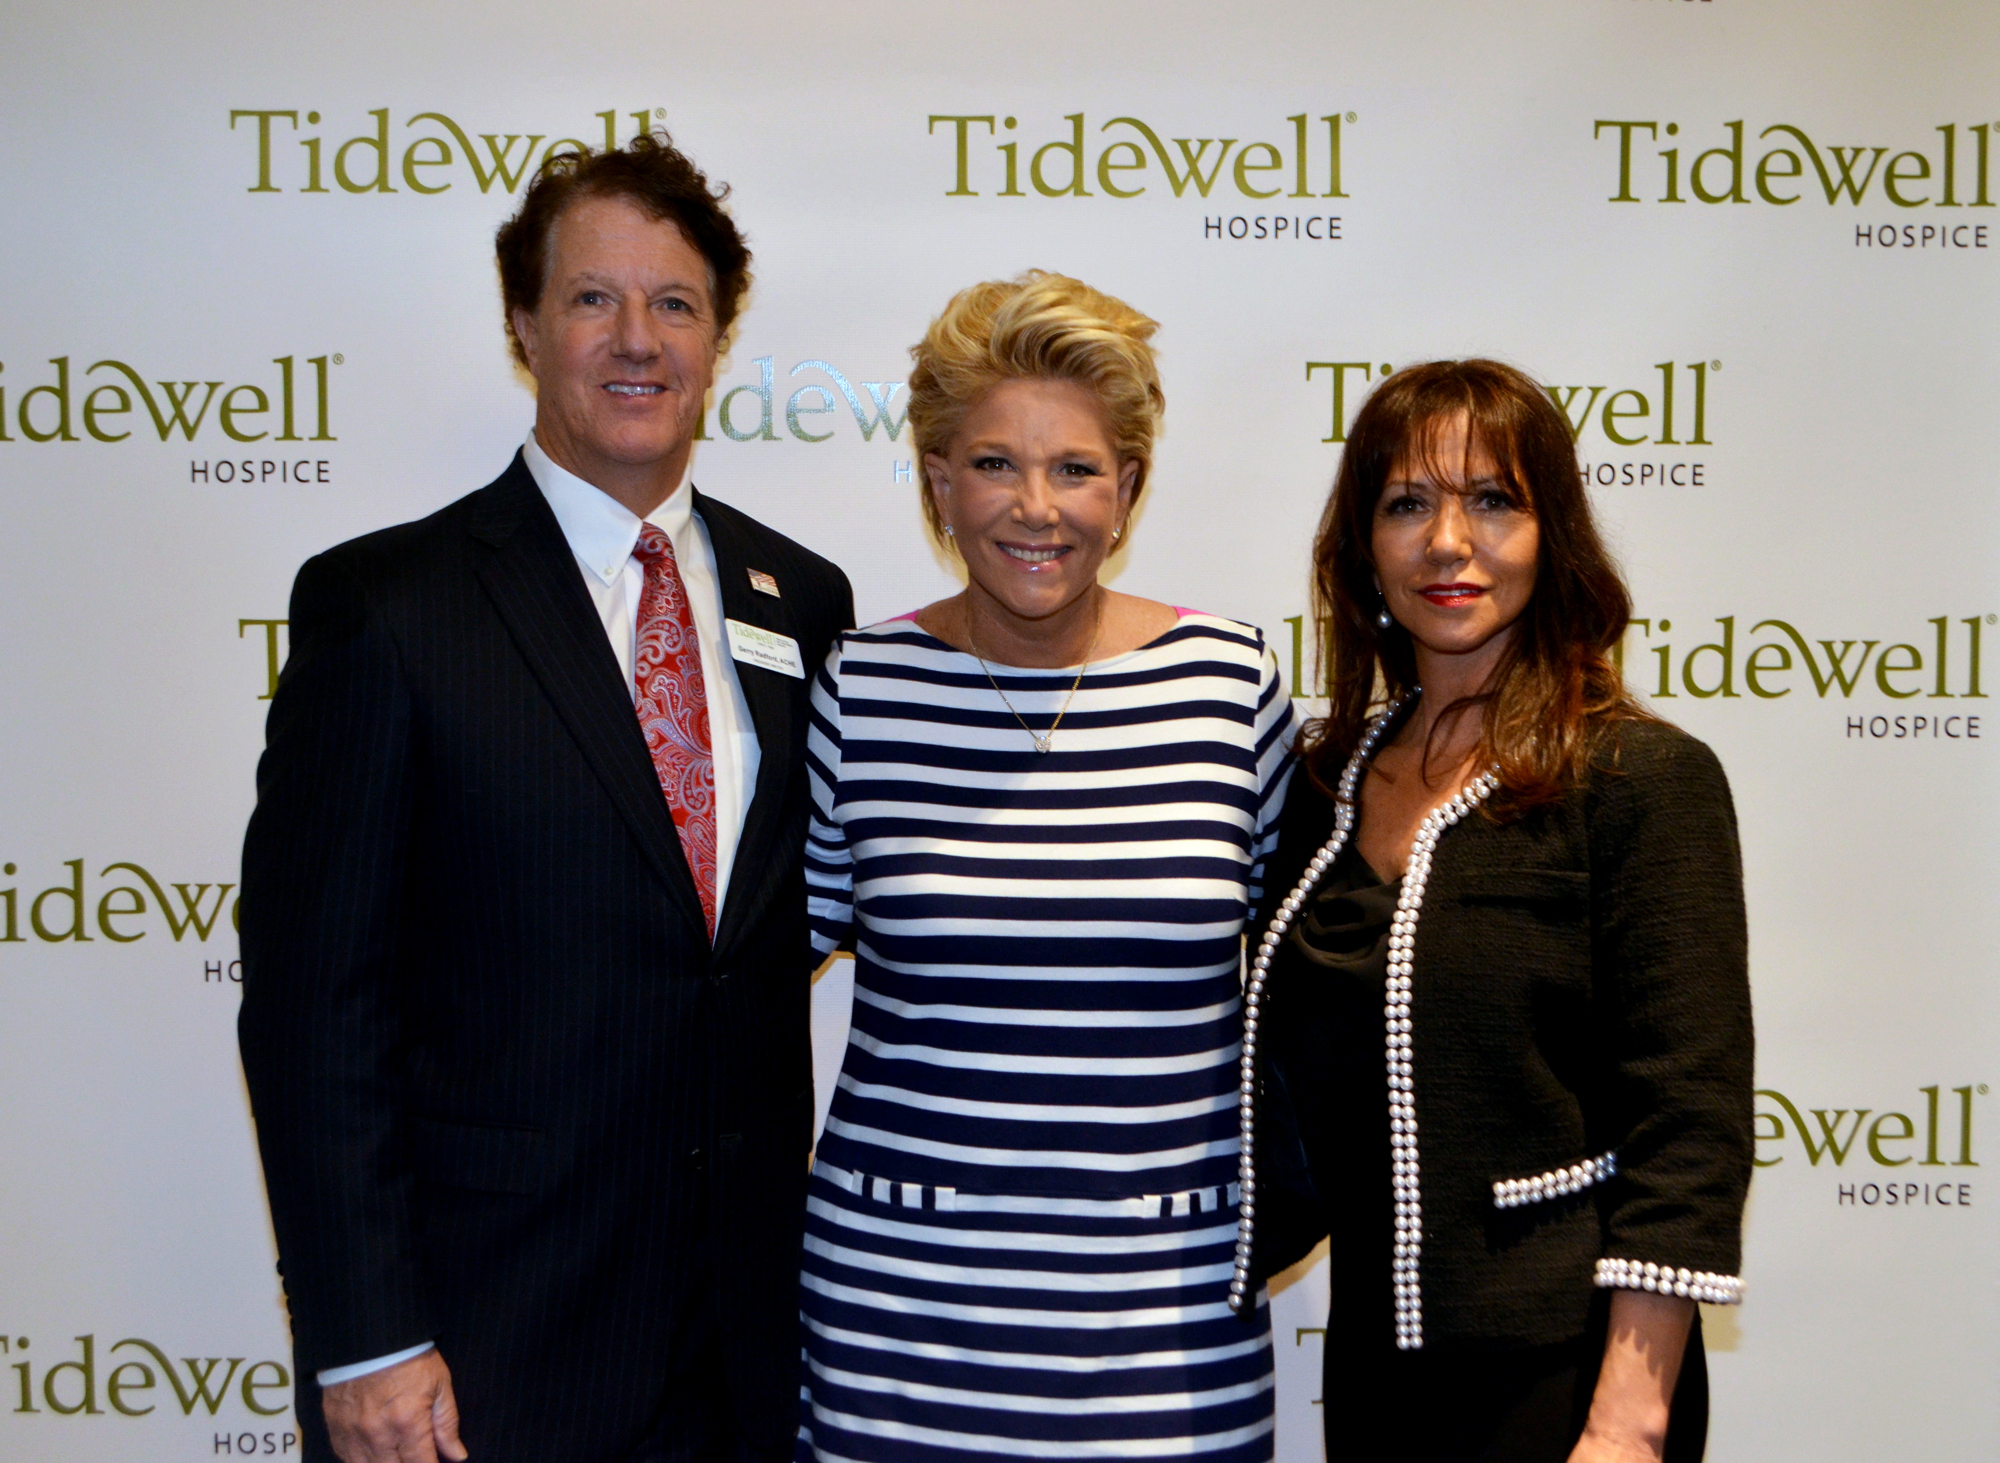 Gerry Radford, Joan Lunden and Natalie Radford at the Tidewell Hospice 7th Annual Signature Luncheon on Friday, Feb. 12, at The Ritz-Carlton, Sarasota. Photo by Heather Merriman Saba